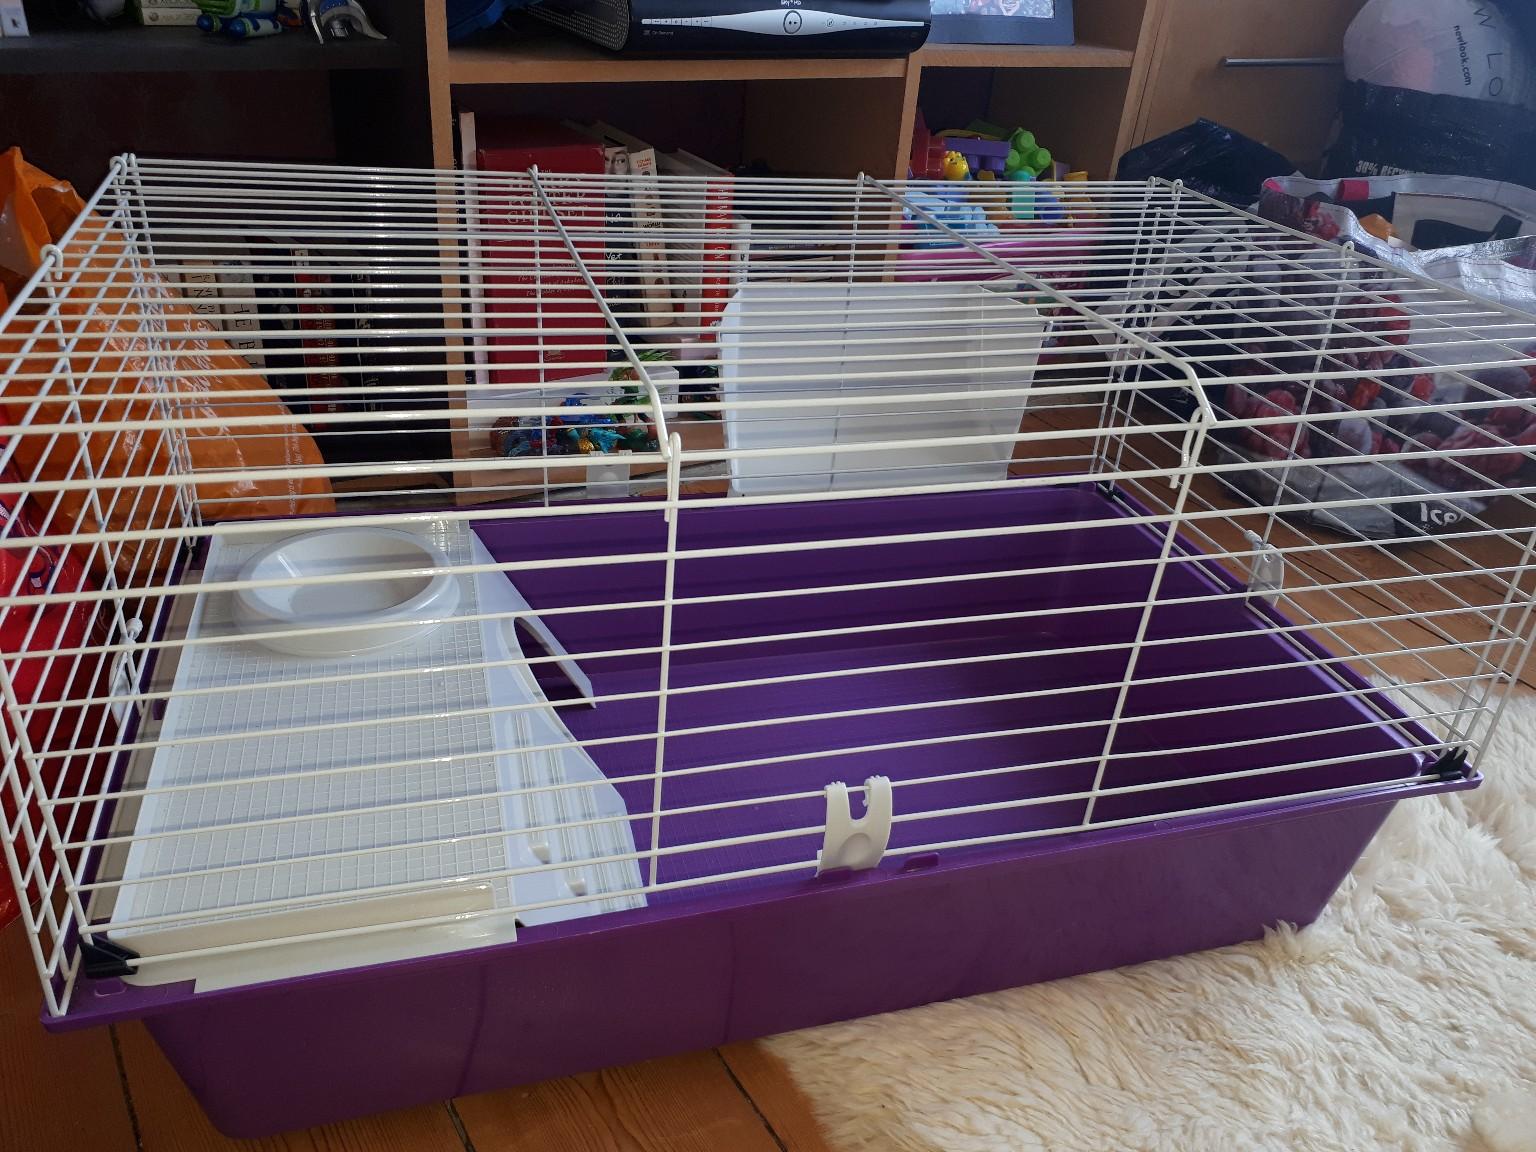 pets at home indoor guinea pig cage